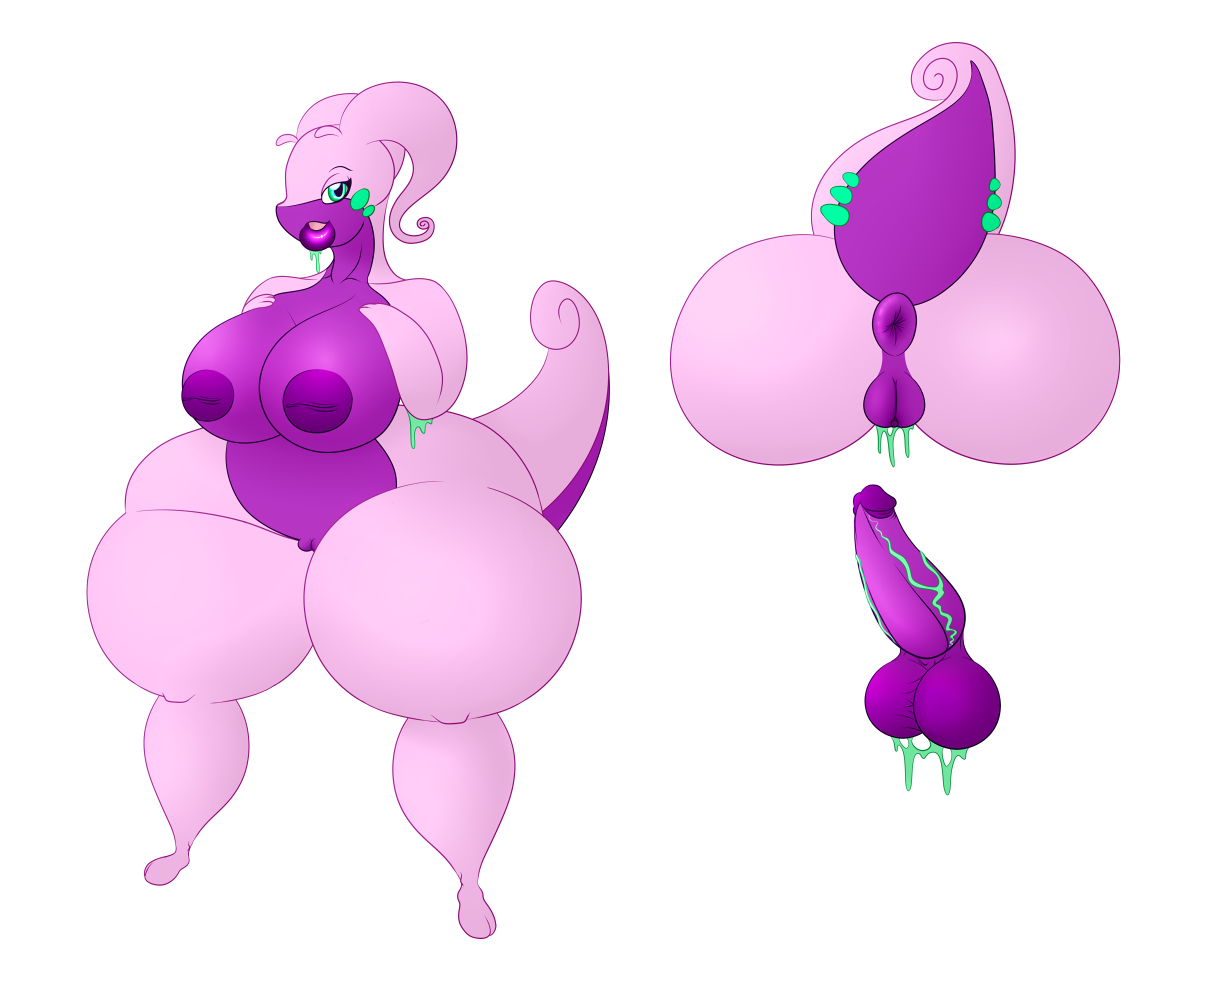   Godiva reference sheet  This is my Goodra OC GodivaShe has the ability to do some